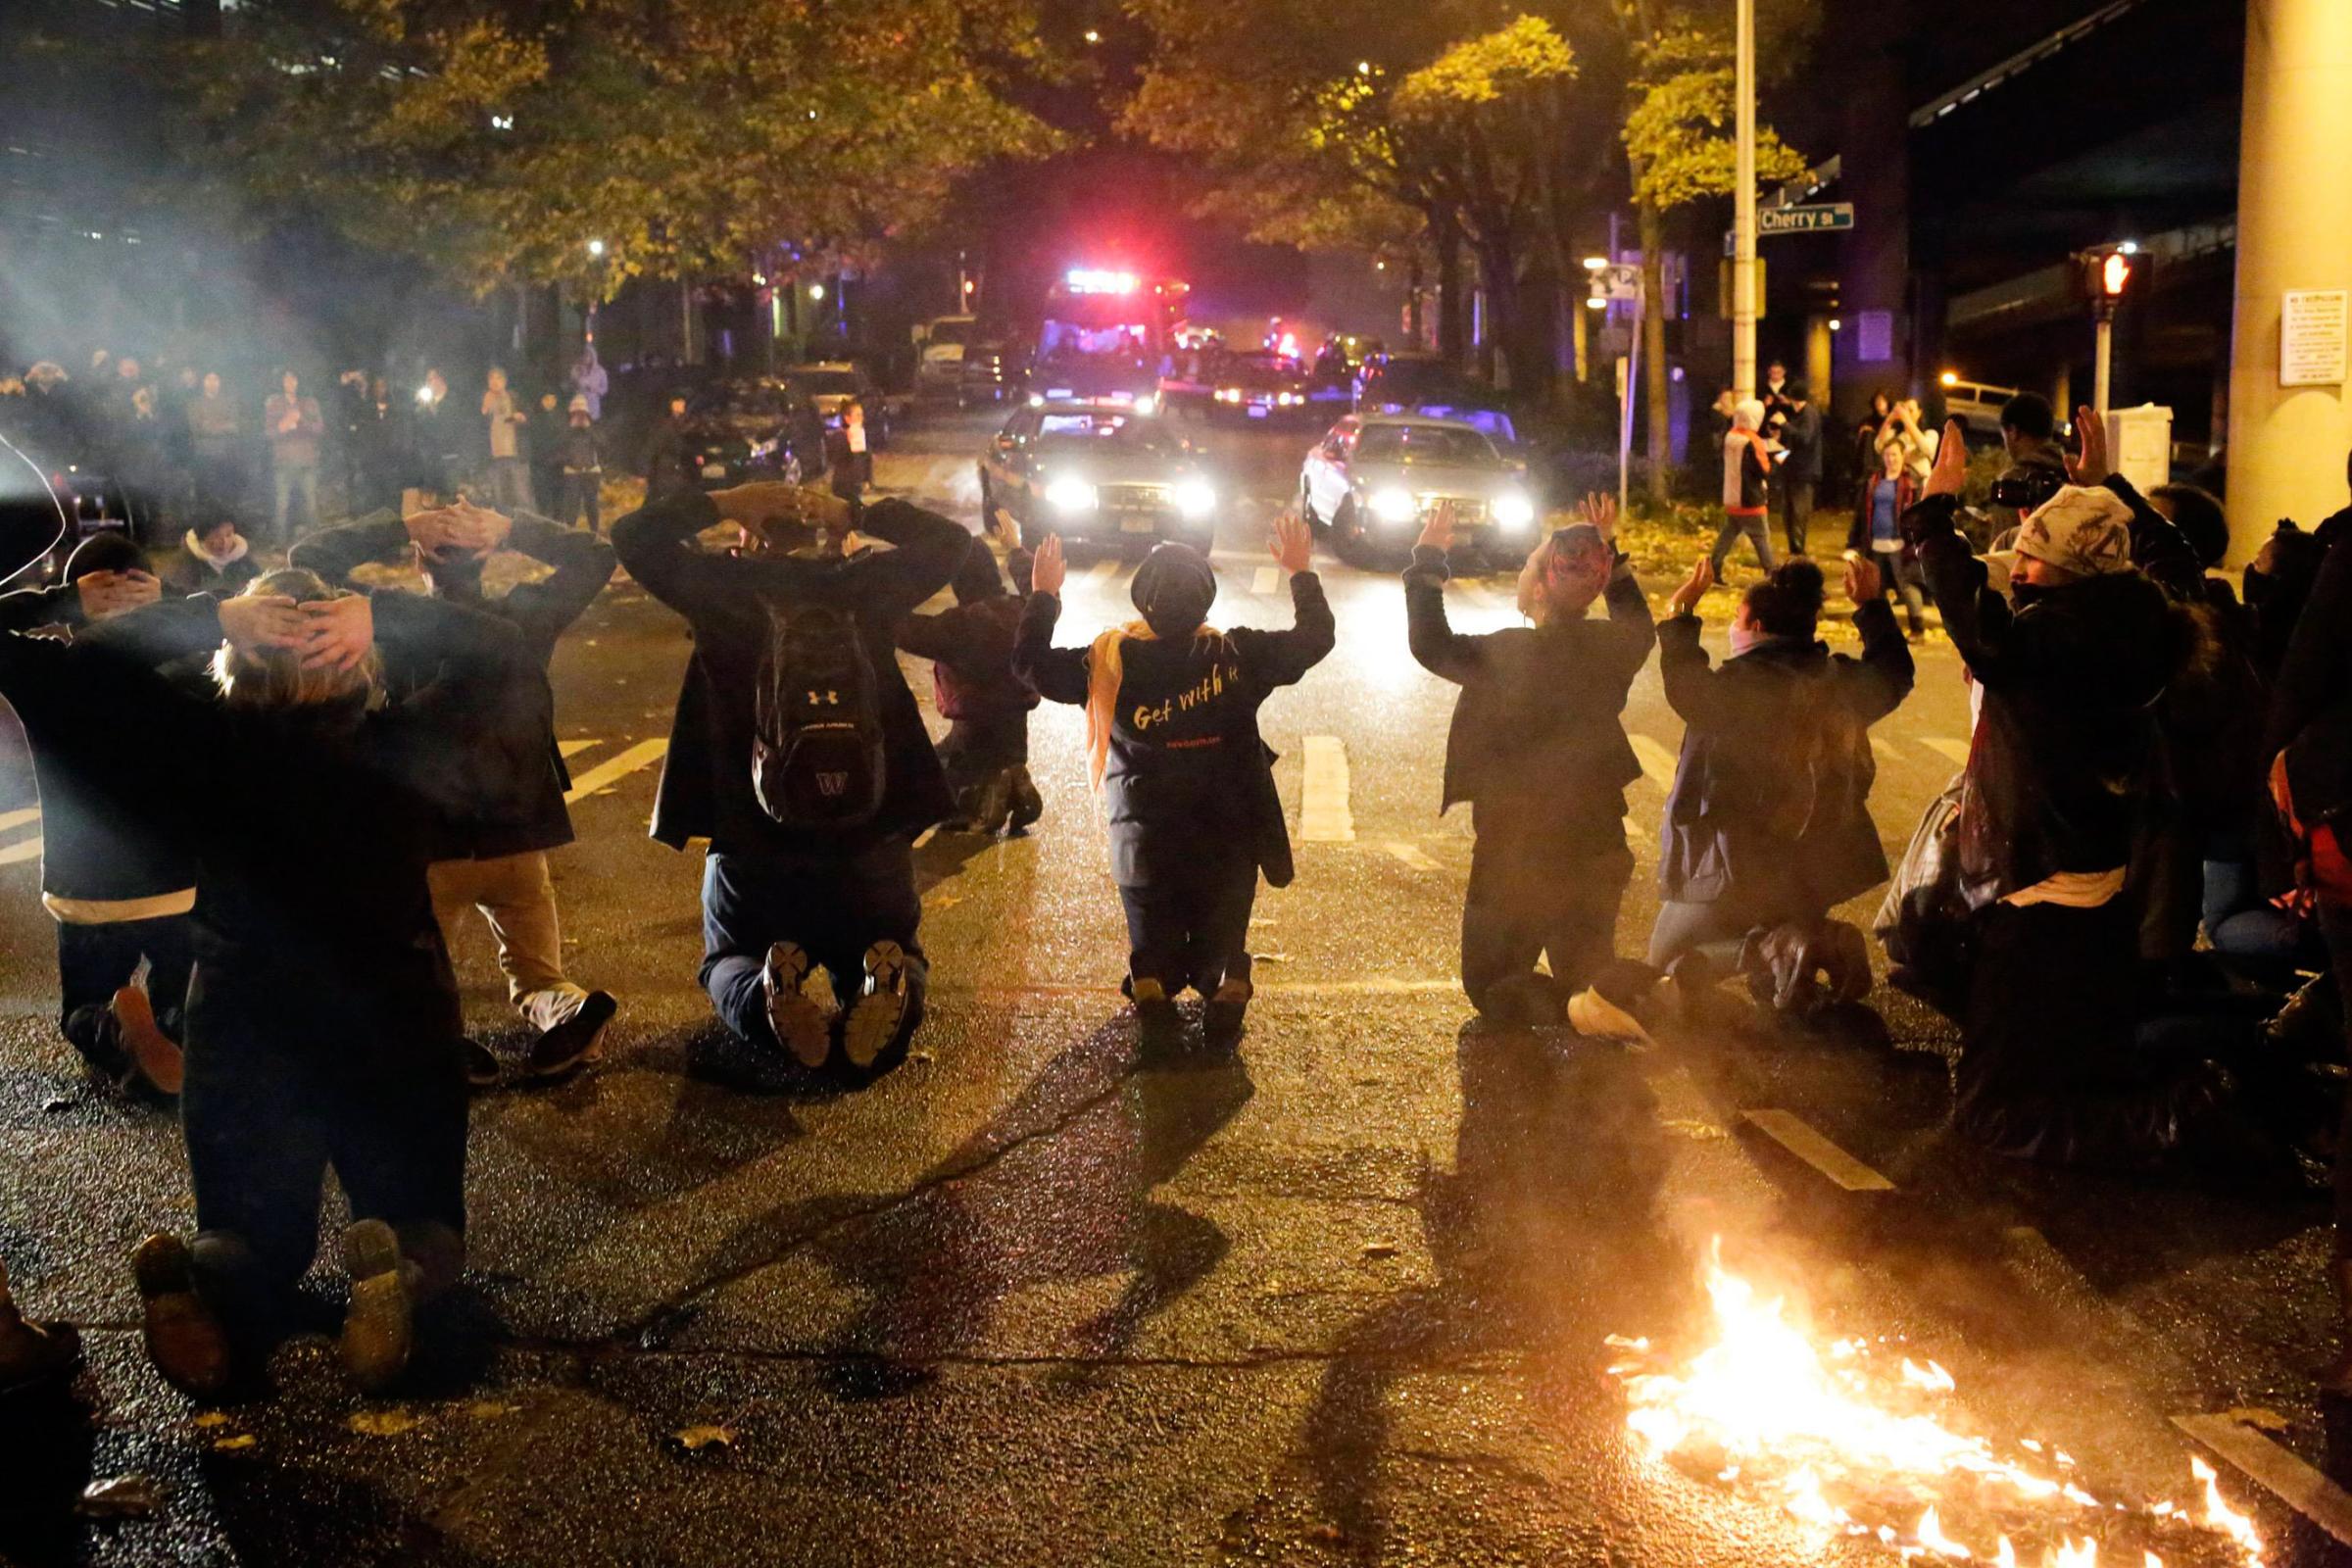 Protesters kneel during a demonstration in Seattle on Nov. 24, 2014.